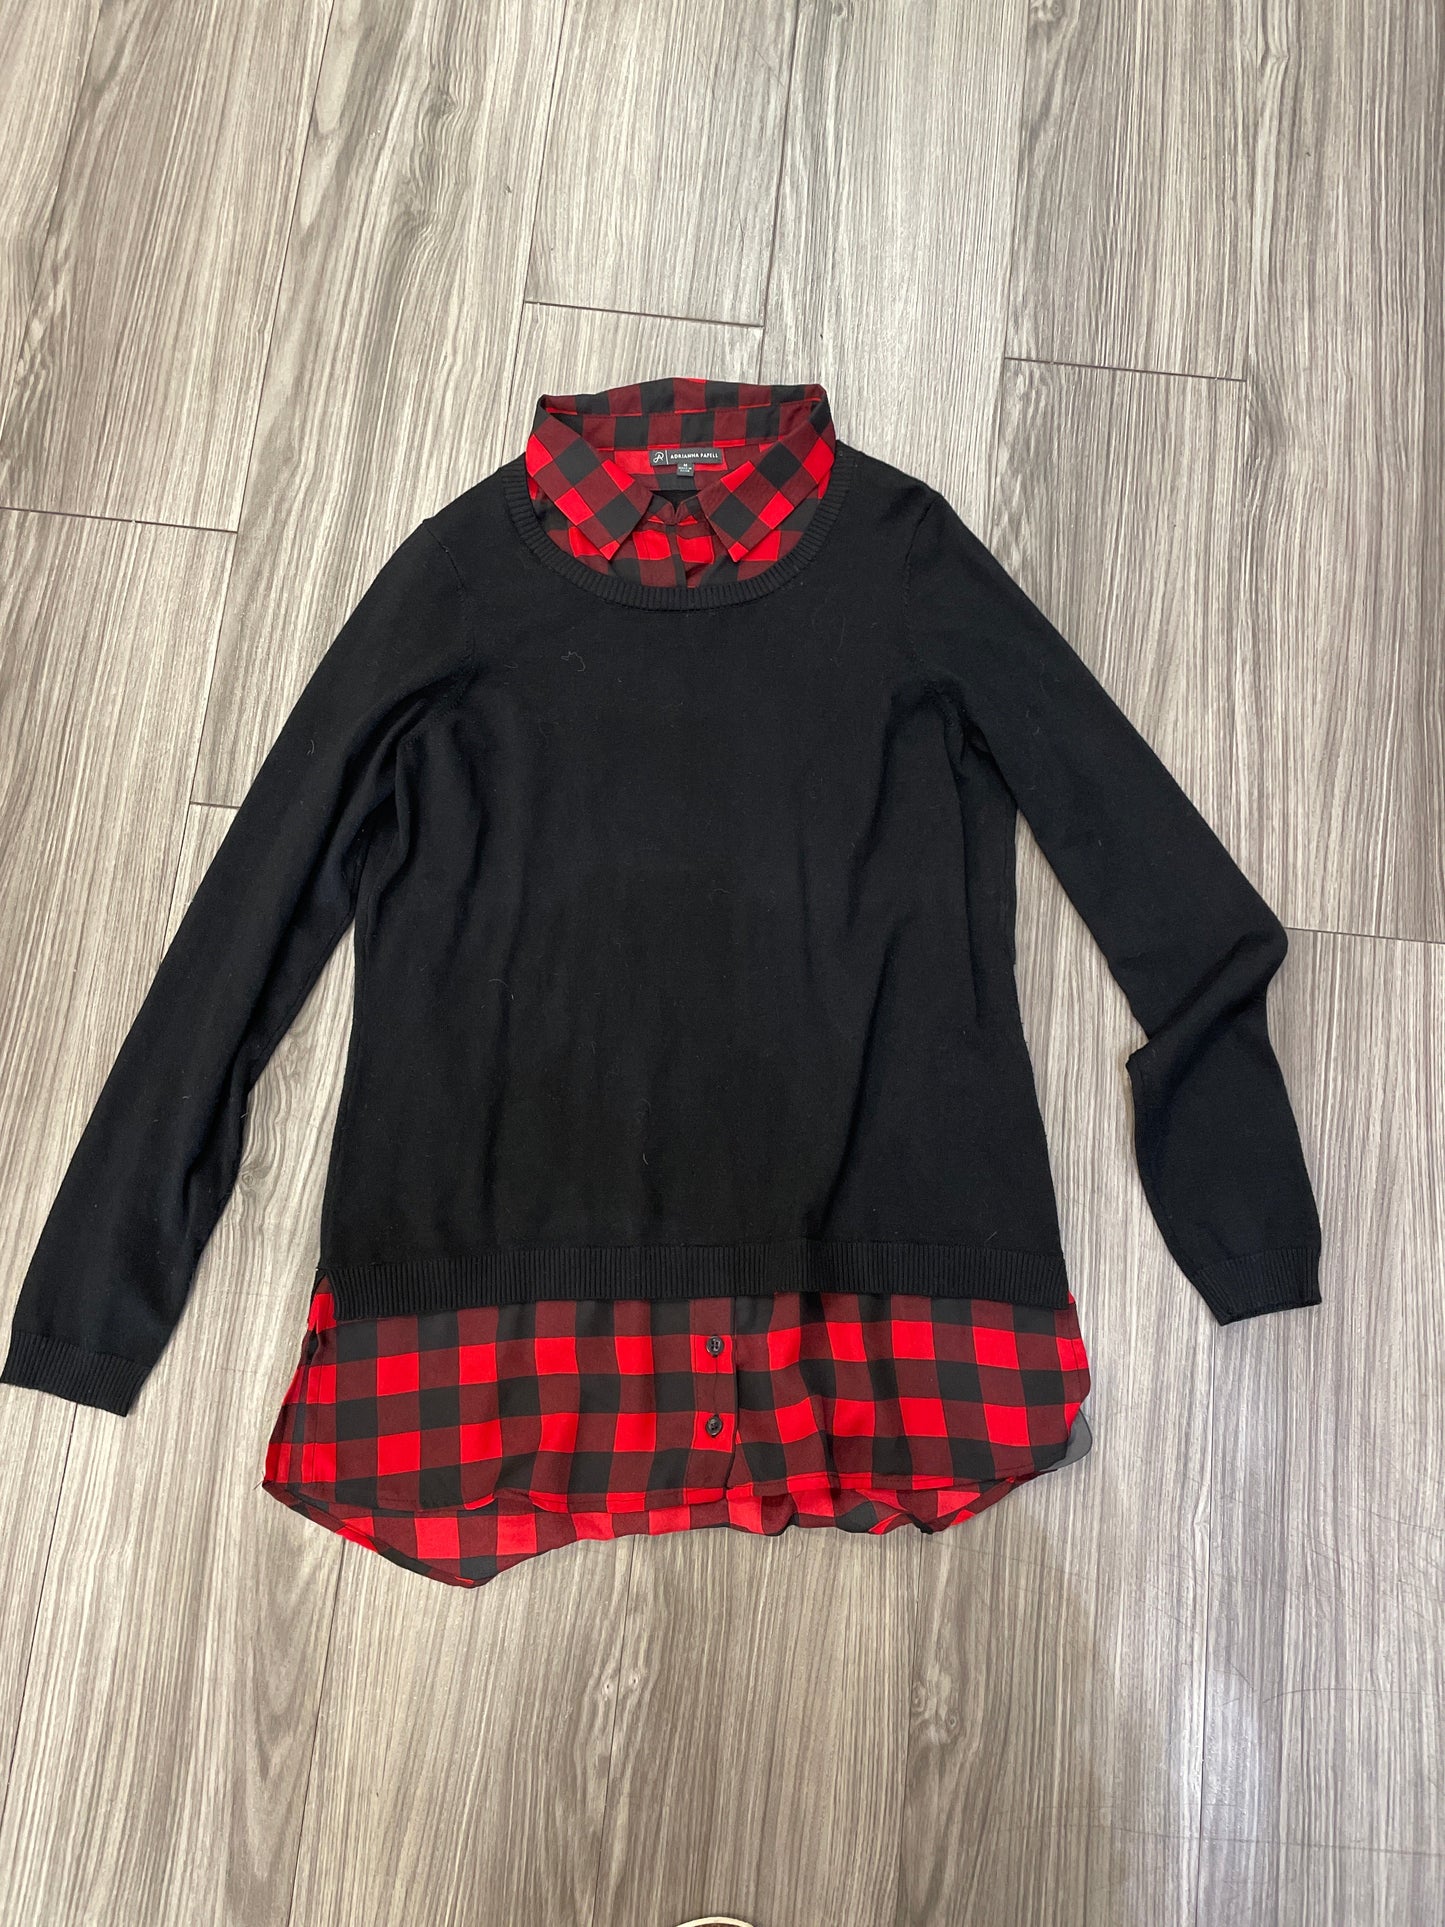 Black Top Long Sleeve Adrianna Papell, Size M